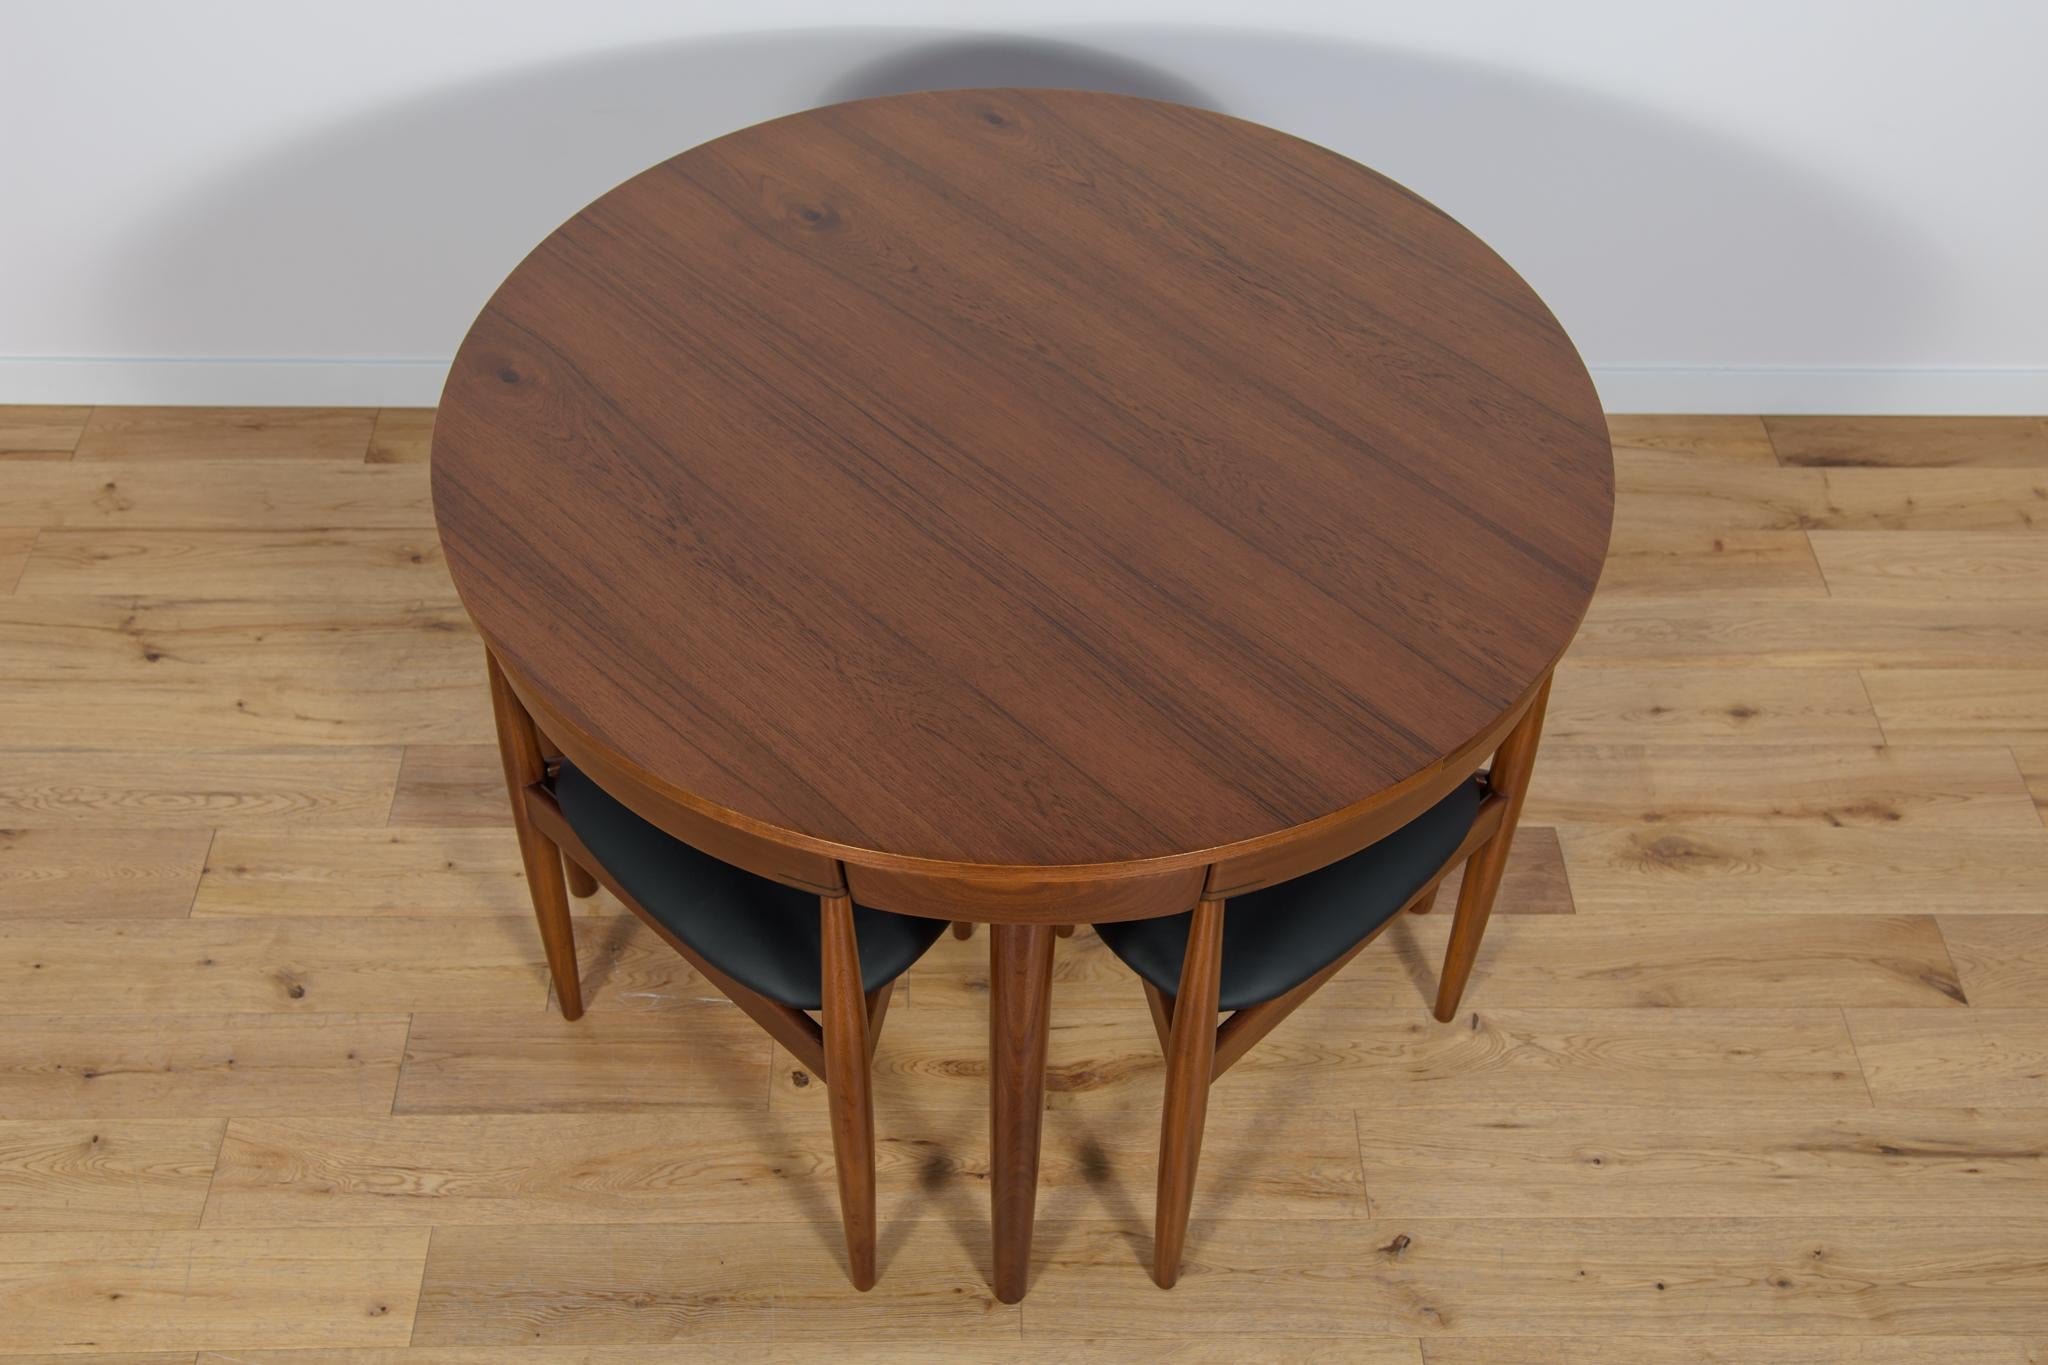 Woodwork Mid-Century Teak Dining Table and Chairs Set by Hans Olsen for Frem Røjle, 1950s For Sale